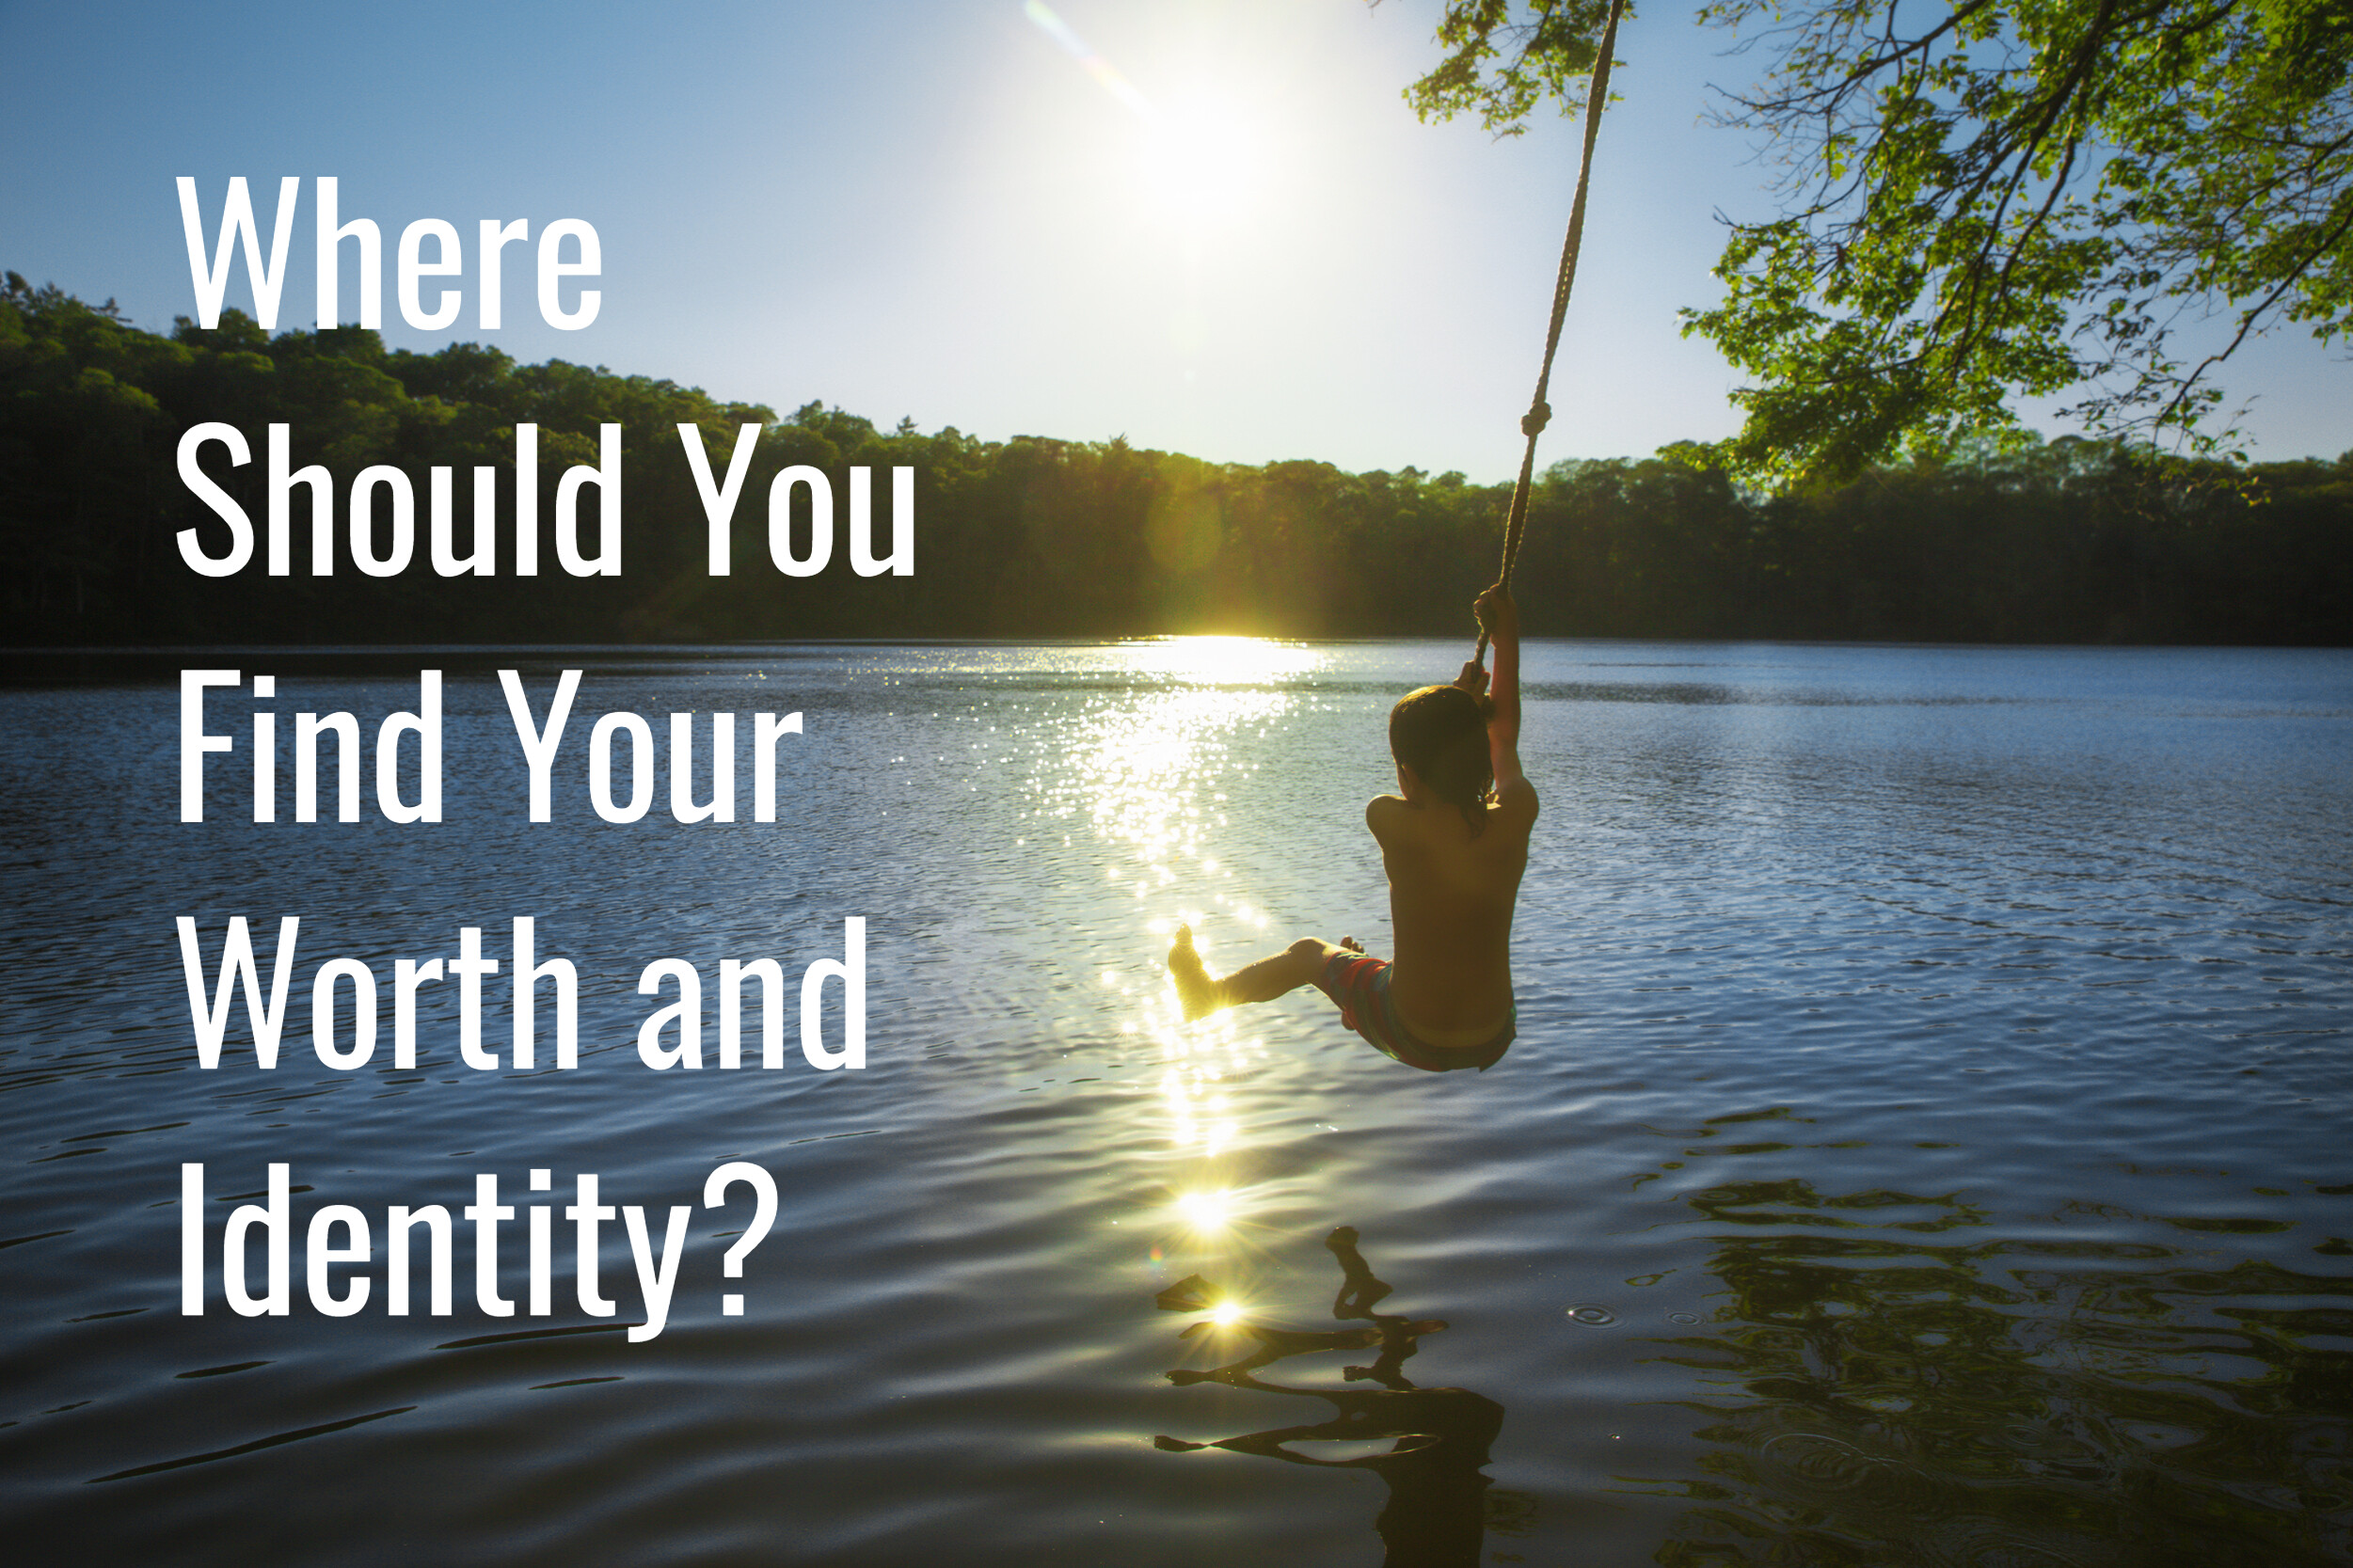 where-should-you-find-your-worth-and-identity?